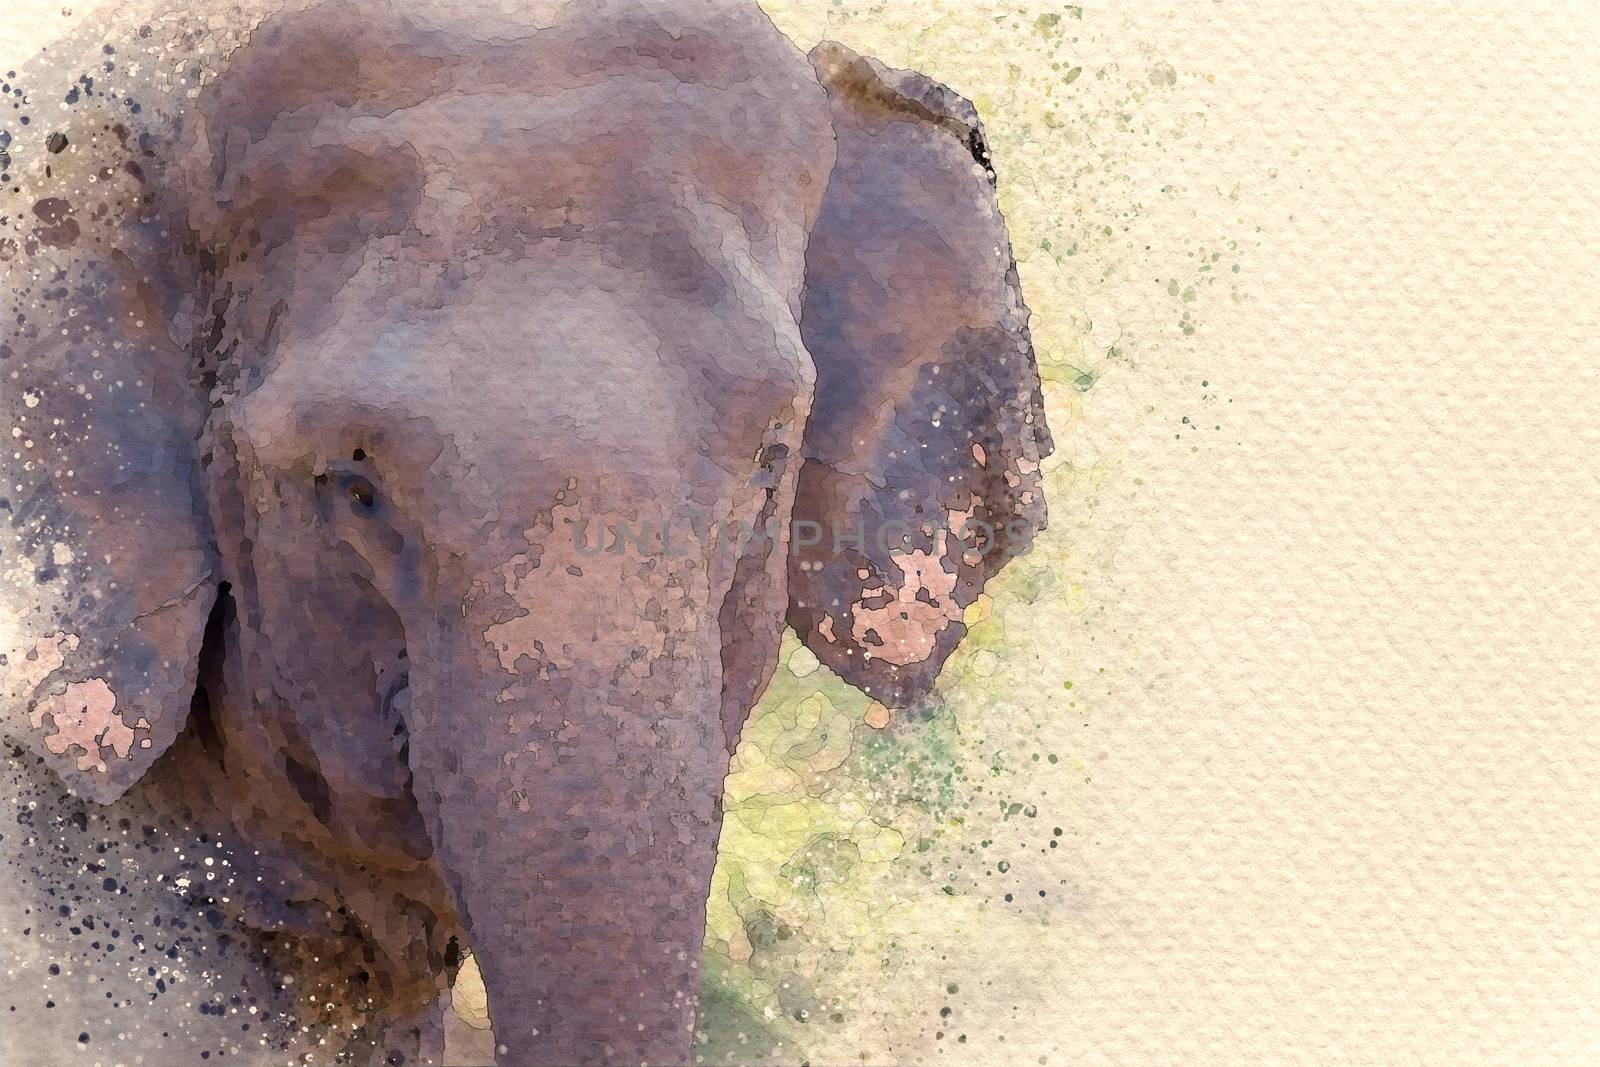 Asian elephant face in forest. Digital watercolor painting effect. Copy space for text.